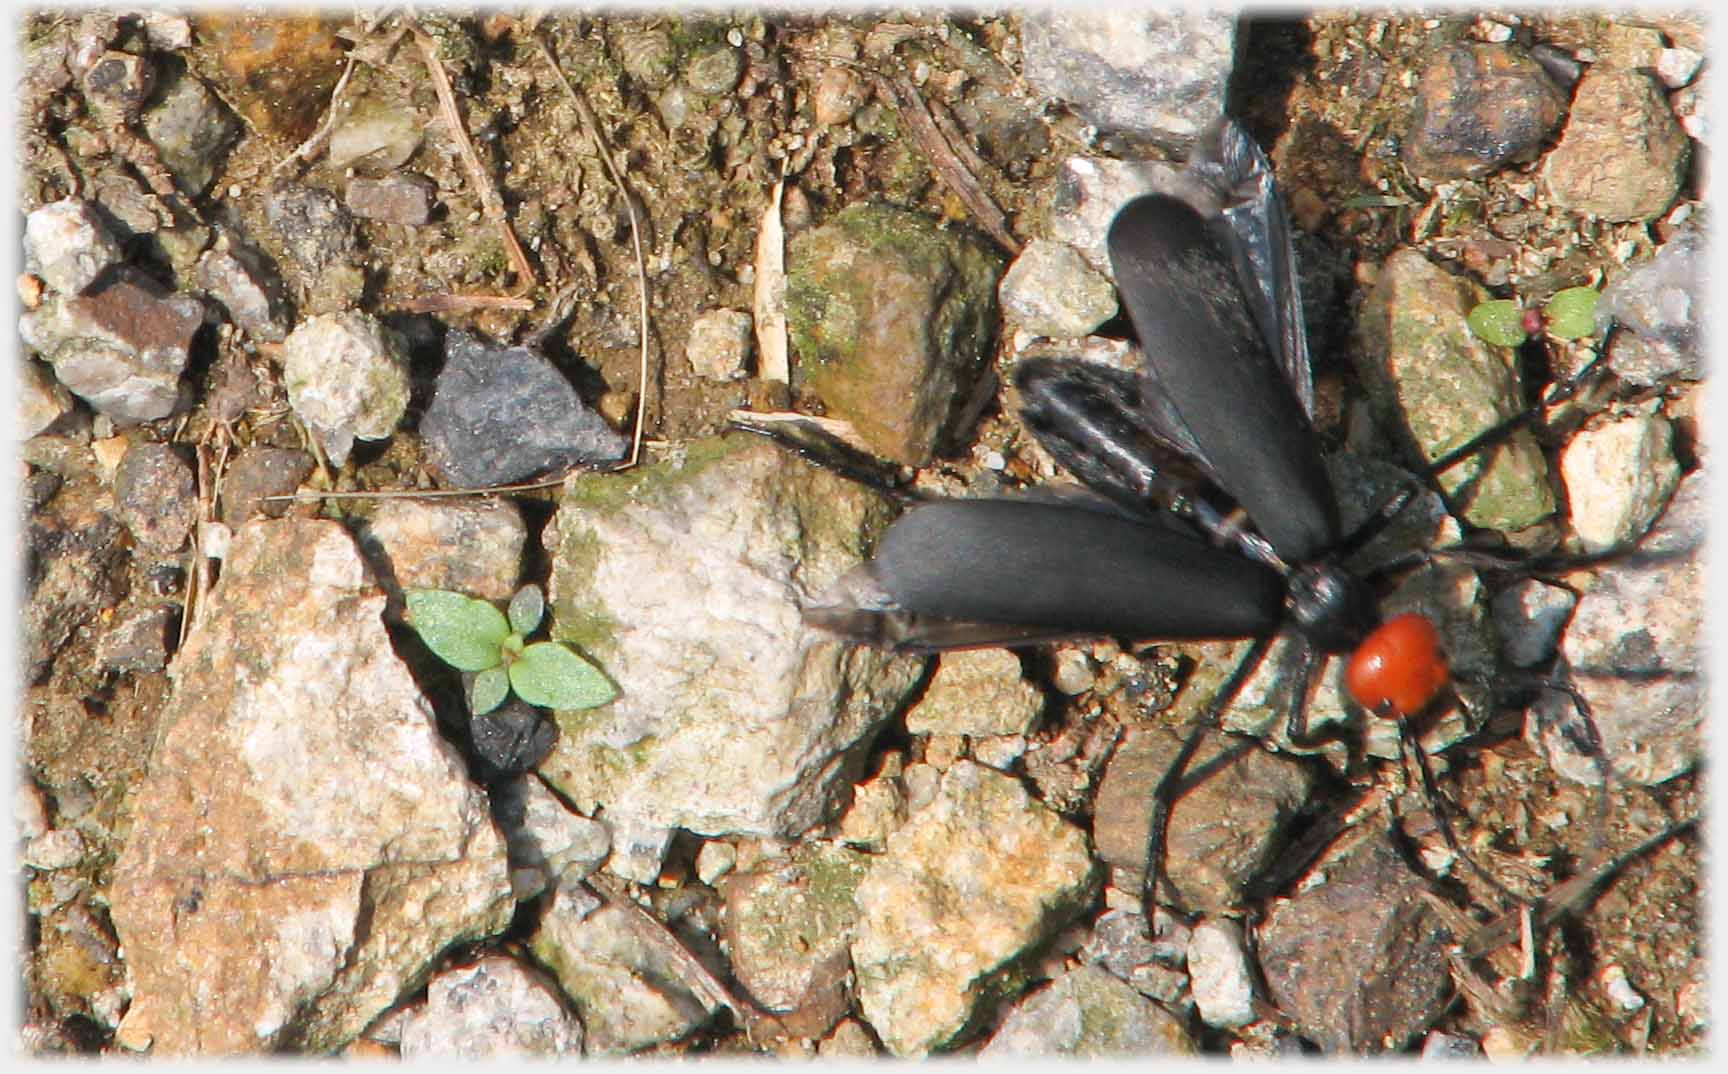 Black bug, with distinctly separate red head.